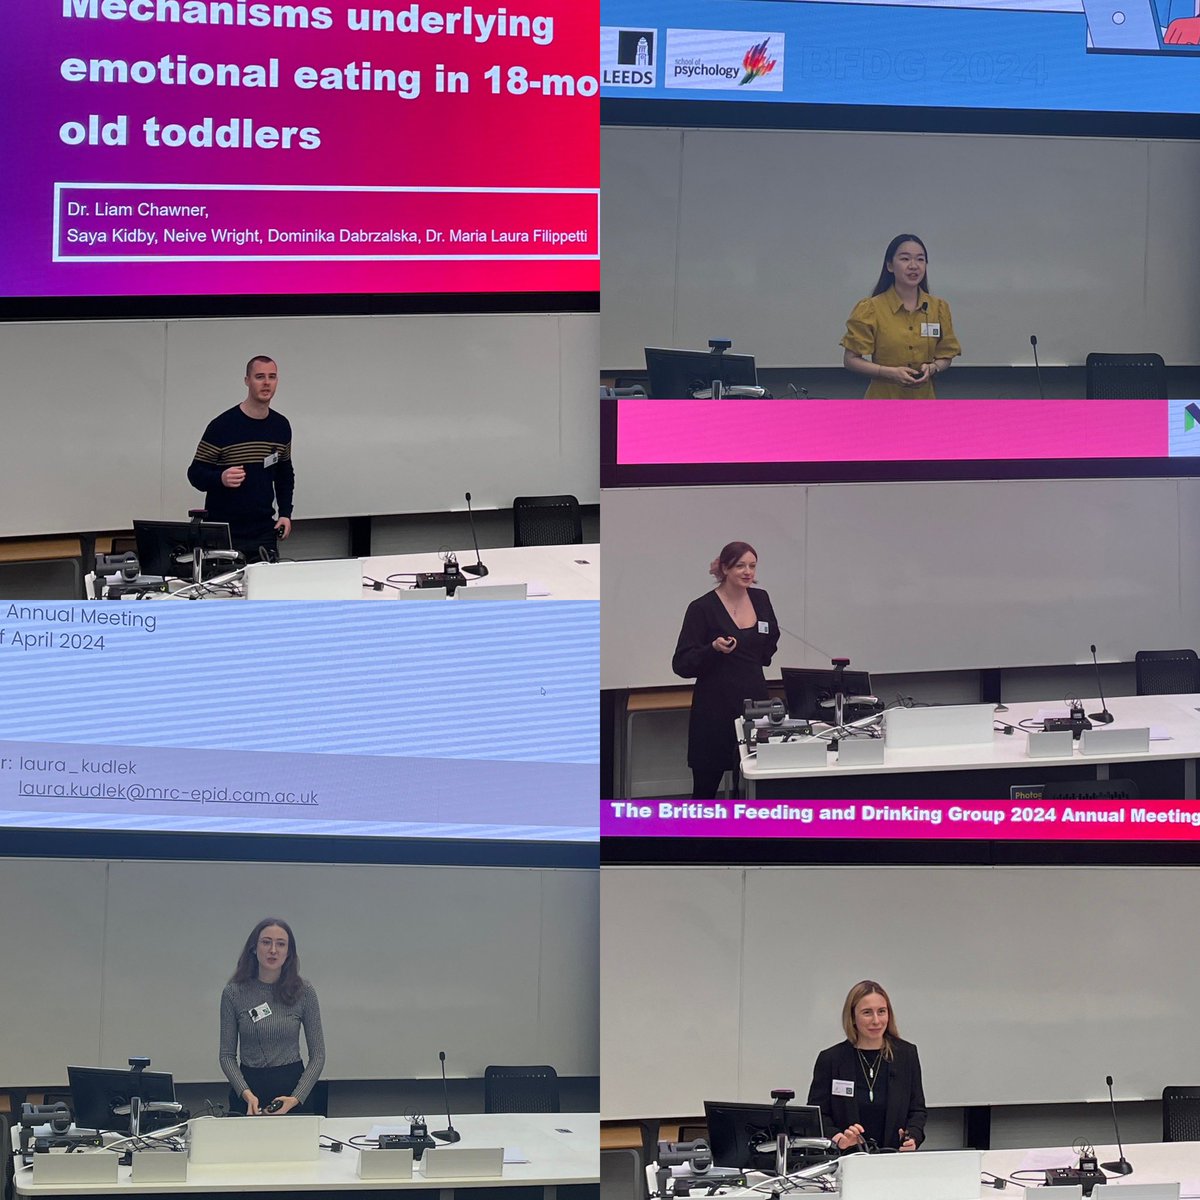 The following session on Emotion Regulation and Eating Behaviour included presentations of @LR_Chawner @filippetti_ml @ShihuiYu0523 @laura_kudlek @courtneyjgneal , well done! 💁🏼‍♀️ #BFDG2024